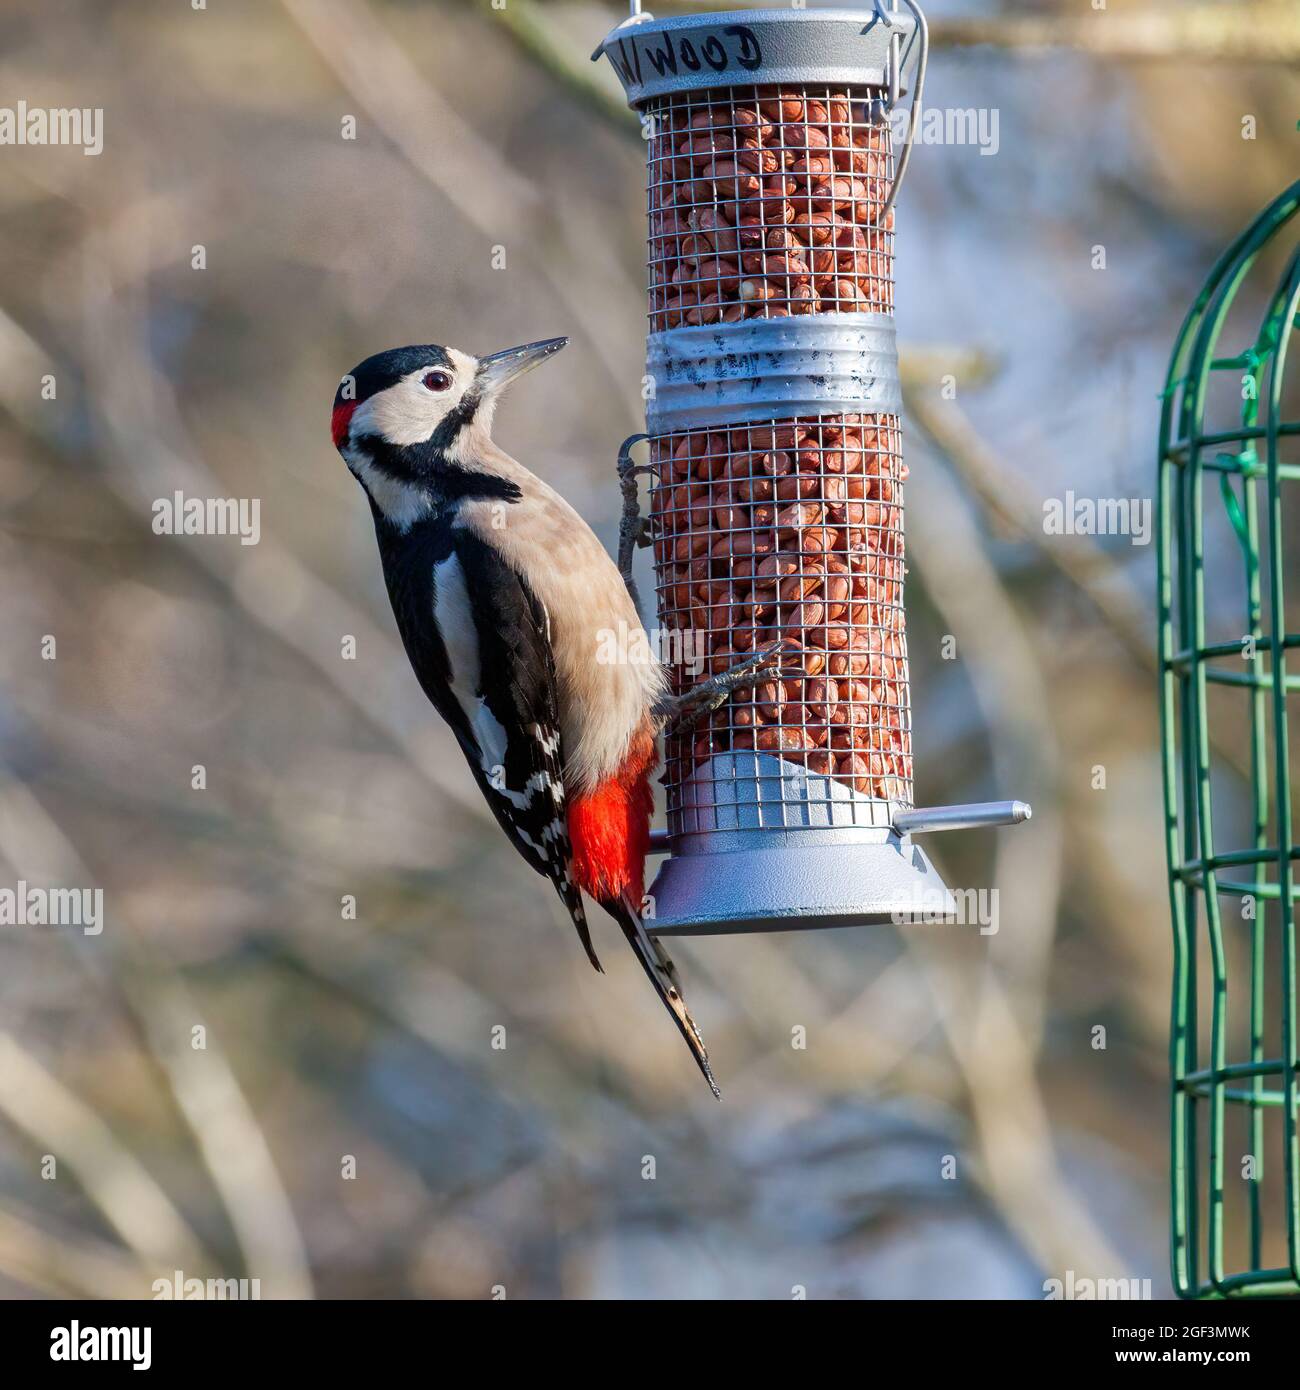 Great Spotted Woodpecker clinging to a peanut feeder Stock Photo